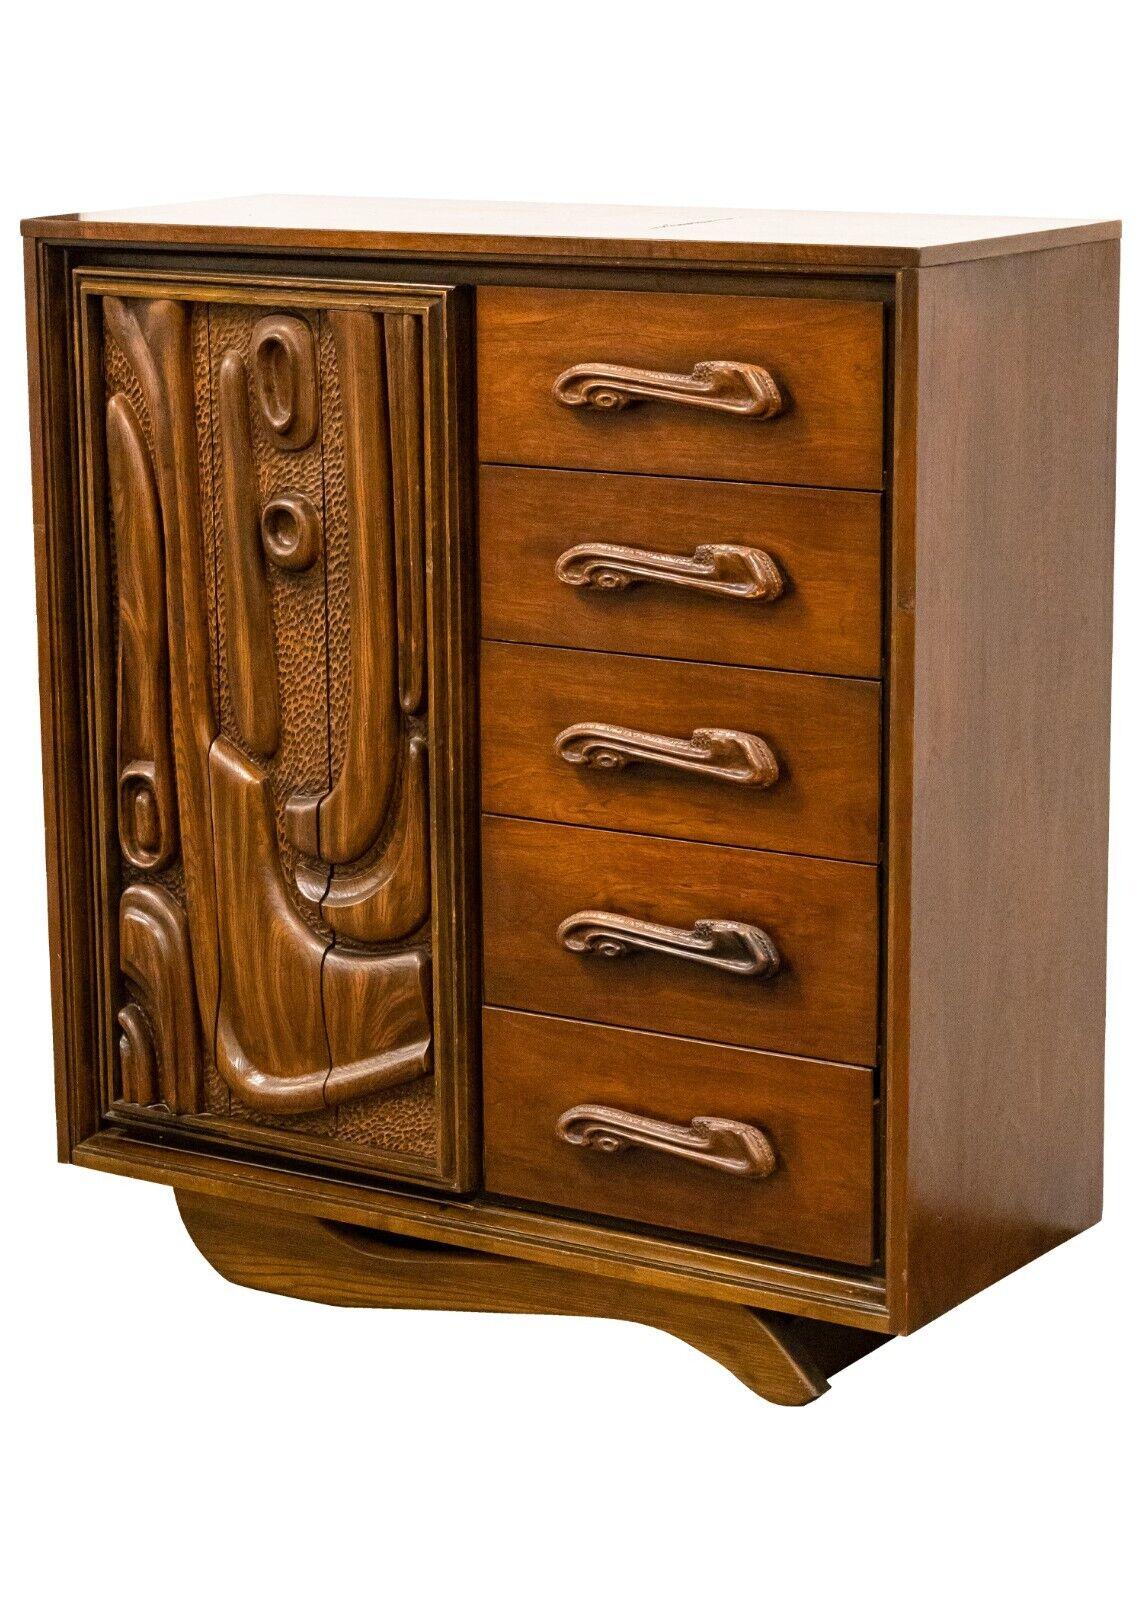 A Witco style Pulaski Oceanic brutalist highboy dresser. This wonderful highboy dresser is a gorgeous addition to any home. This dresser was created with style and design in mind, showcasing its stunning woodwork and a beautiful silhouette. This